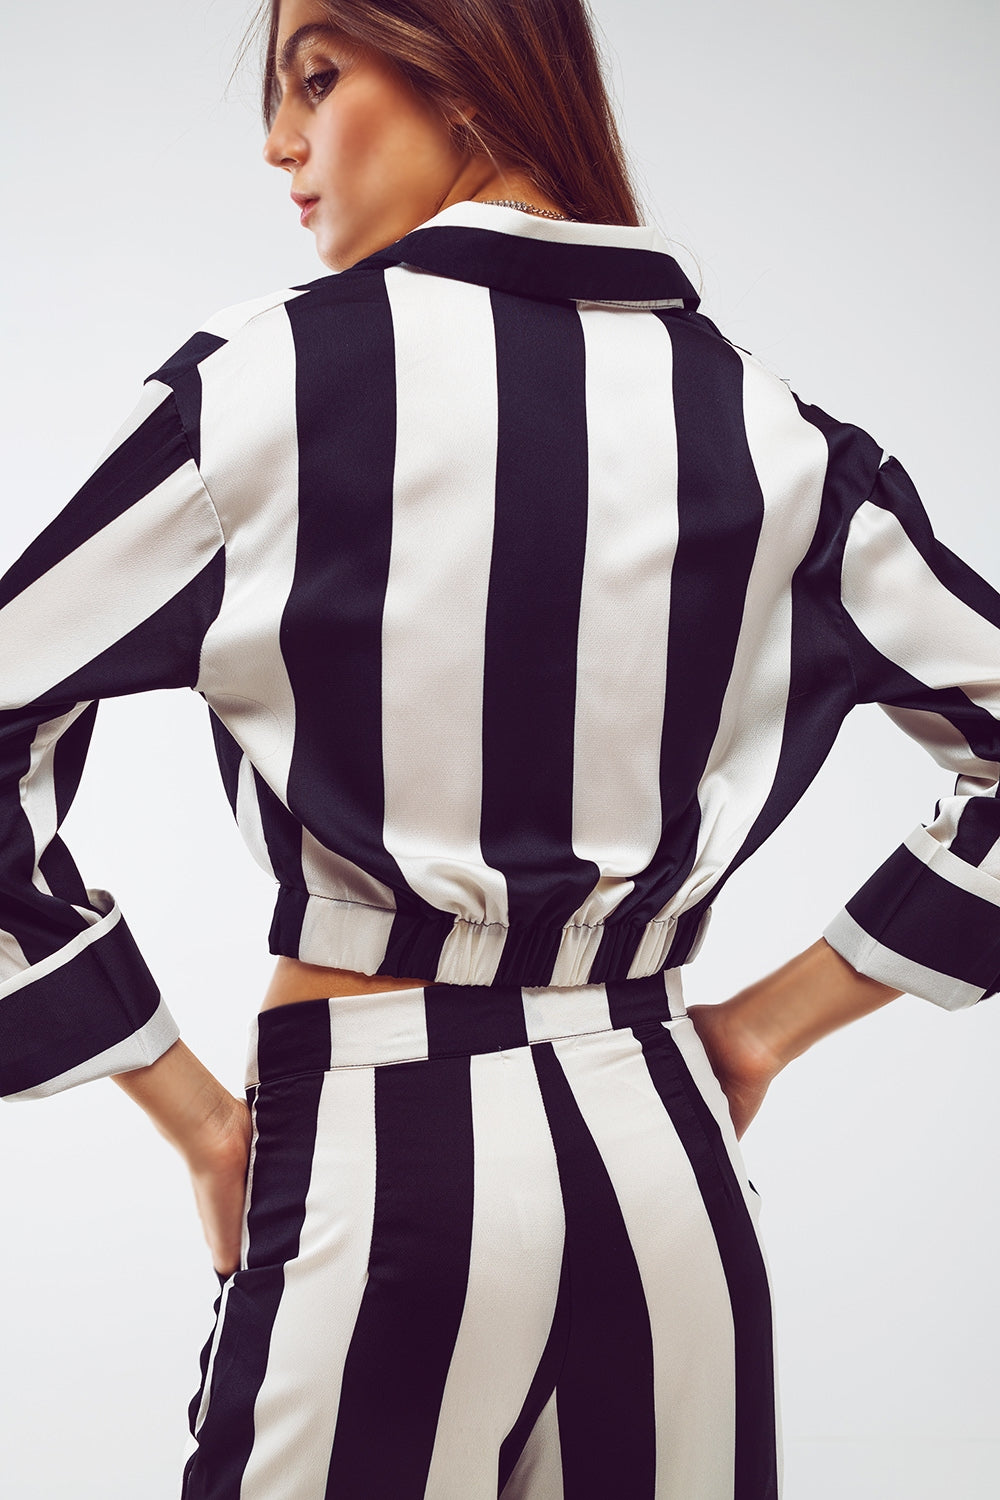 Crop Shirt With Knot Detail in Black and White Stripes - Szua Store